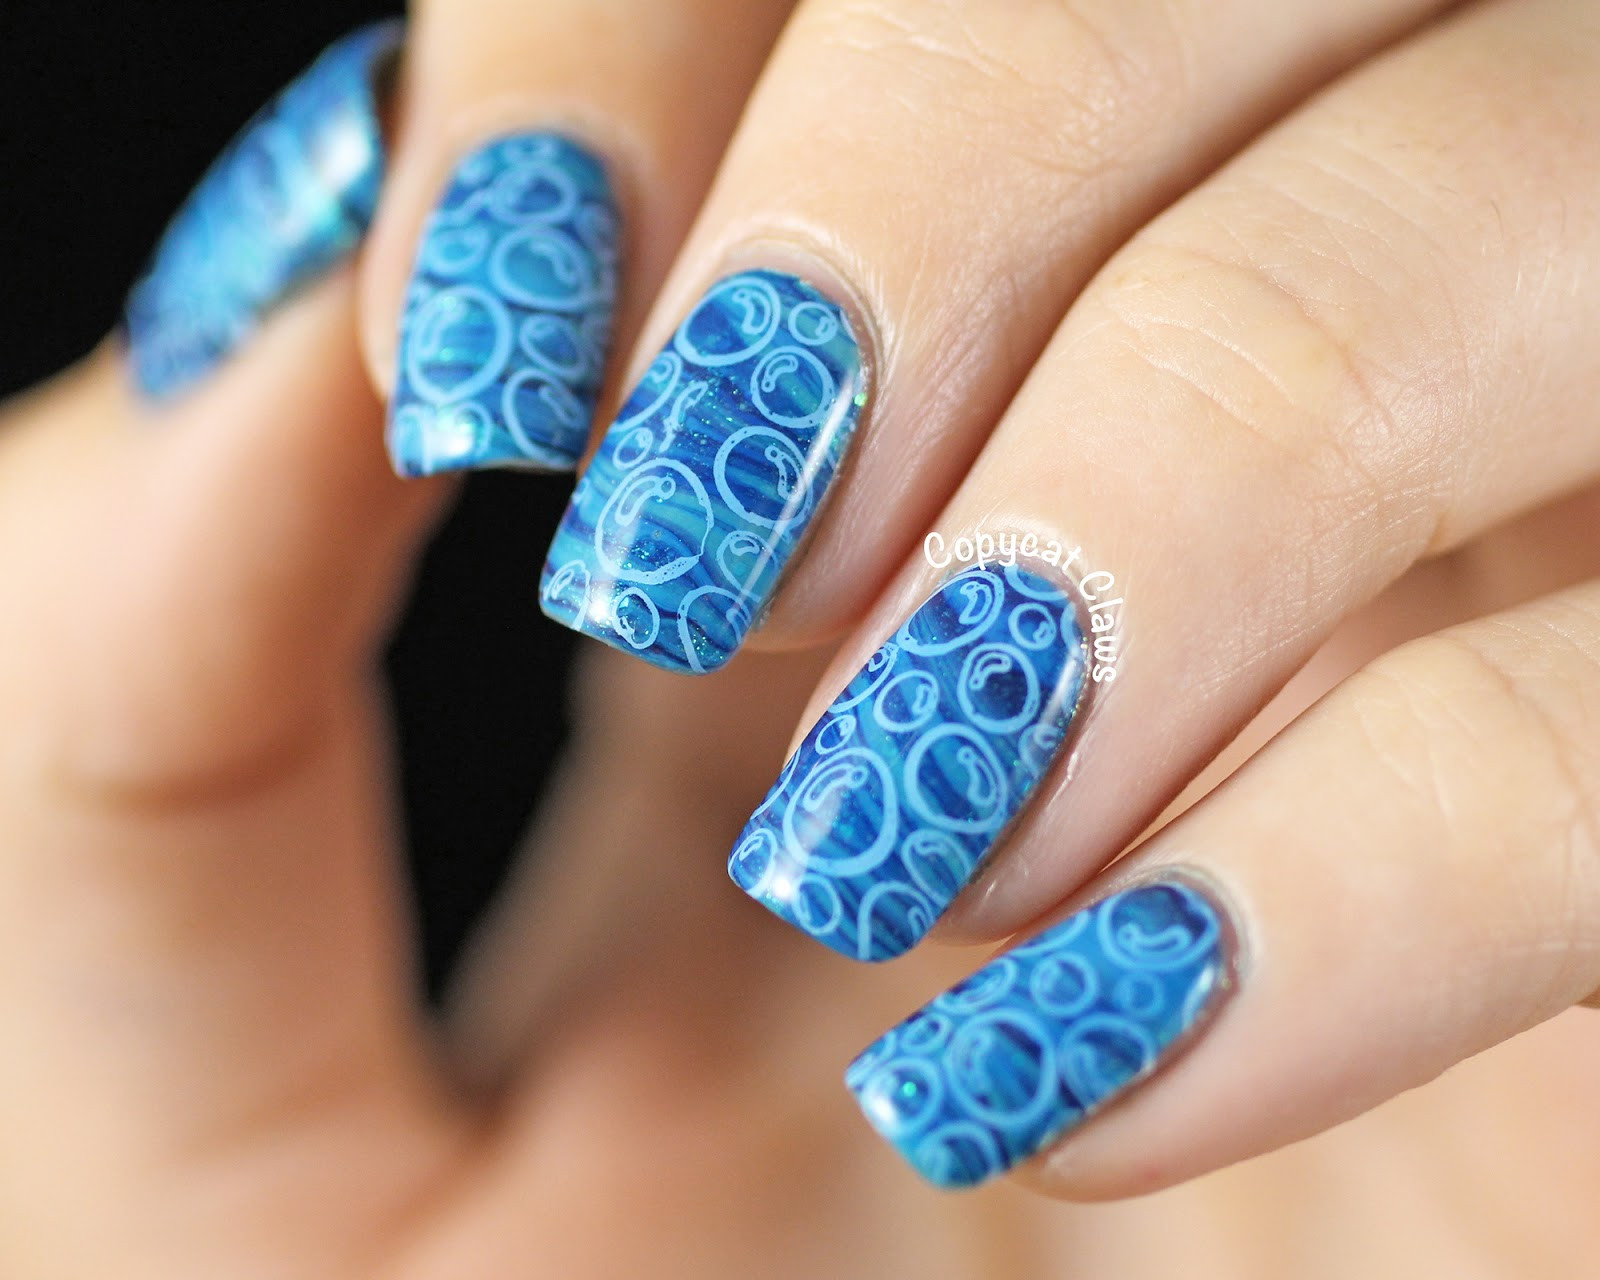 Nail Designs In Water
 Copycat Claws 31DC2014 Day 20 Blue Water Marble Nail Art